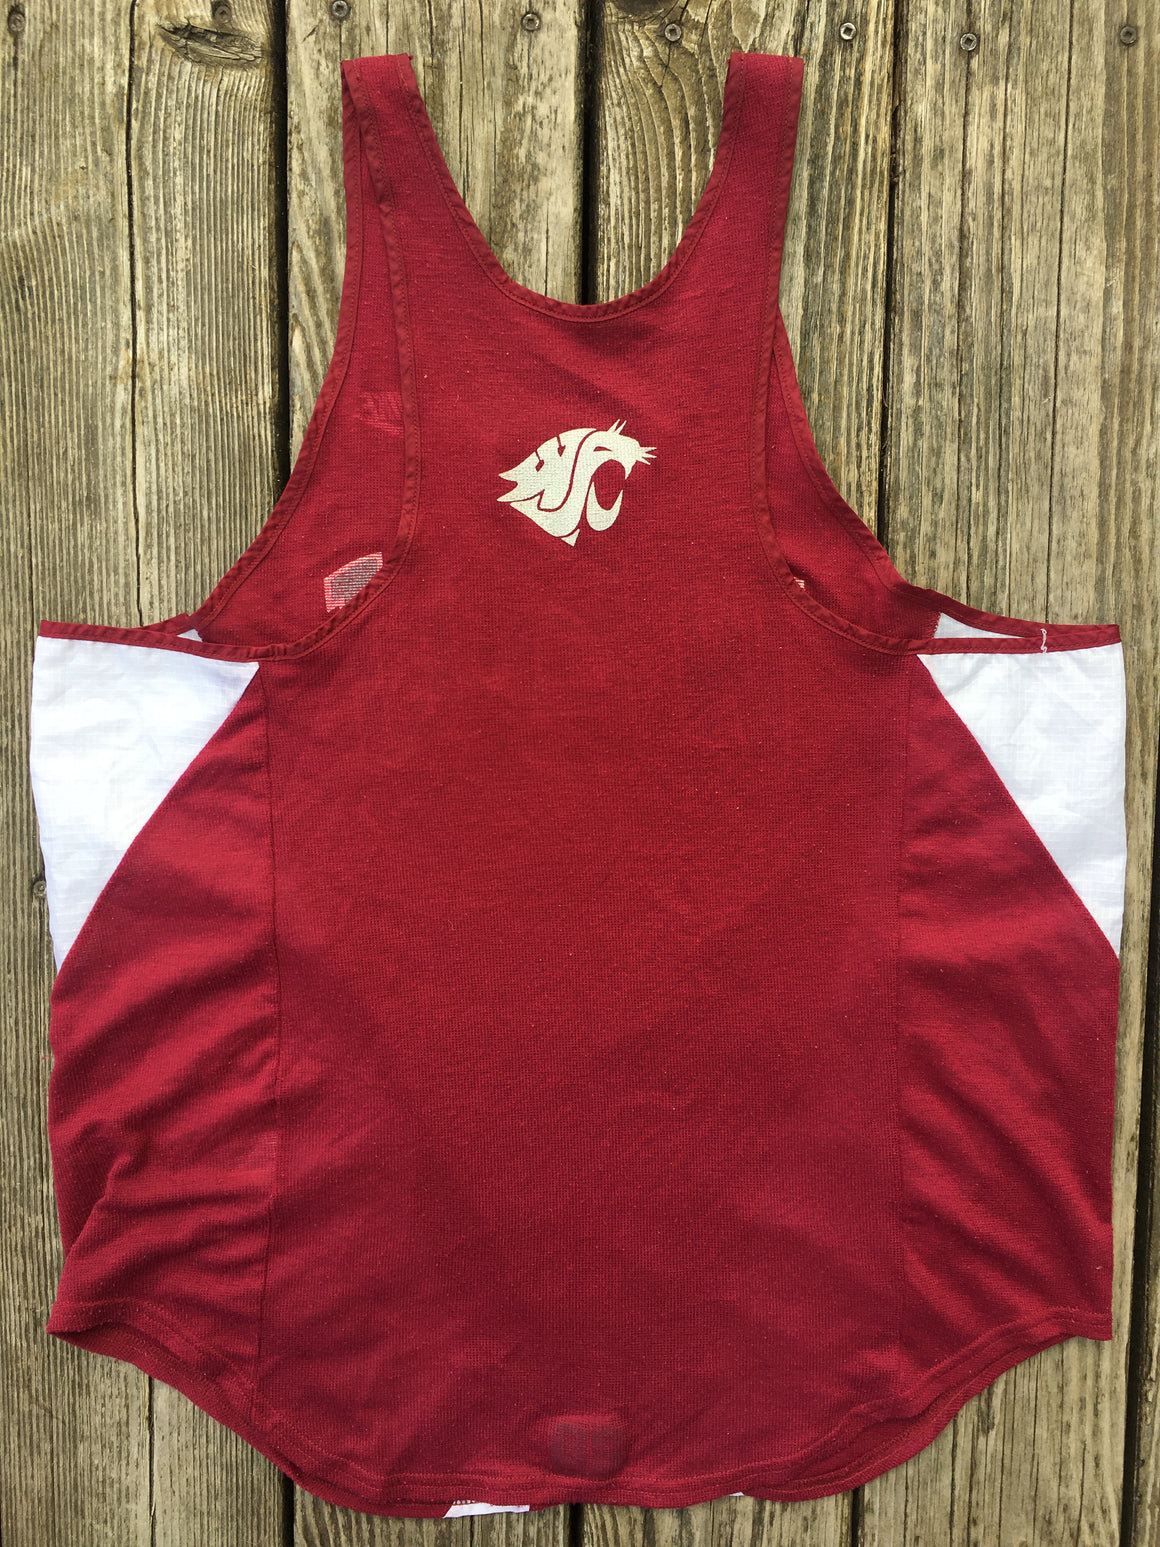 WSU Cougars authentic Track jersey - L / XL